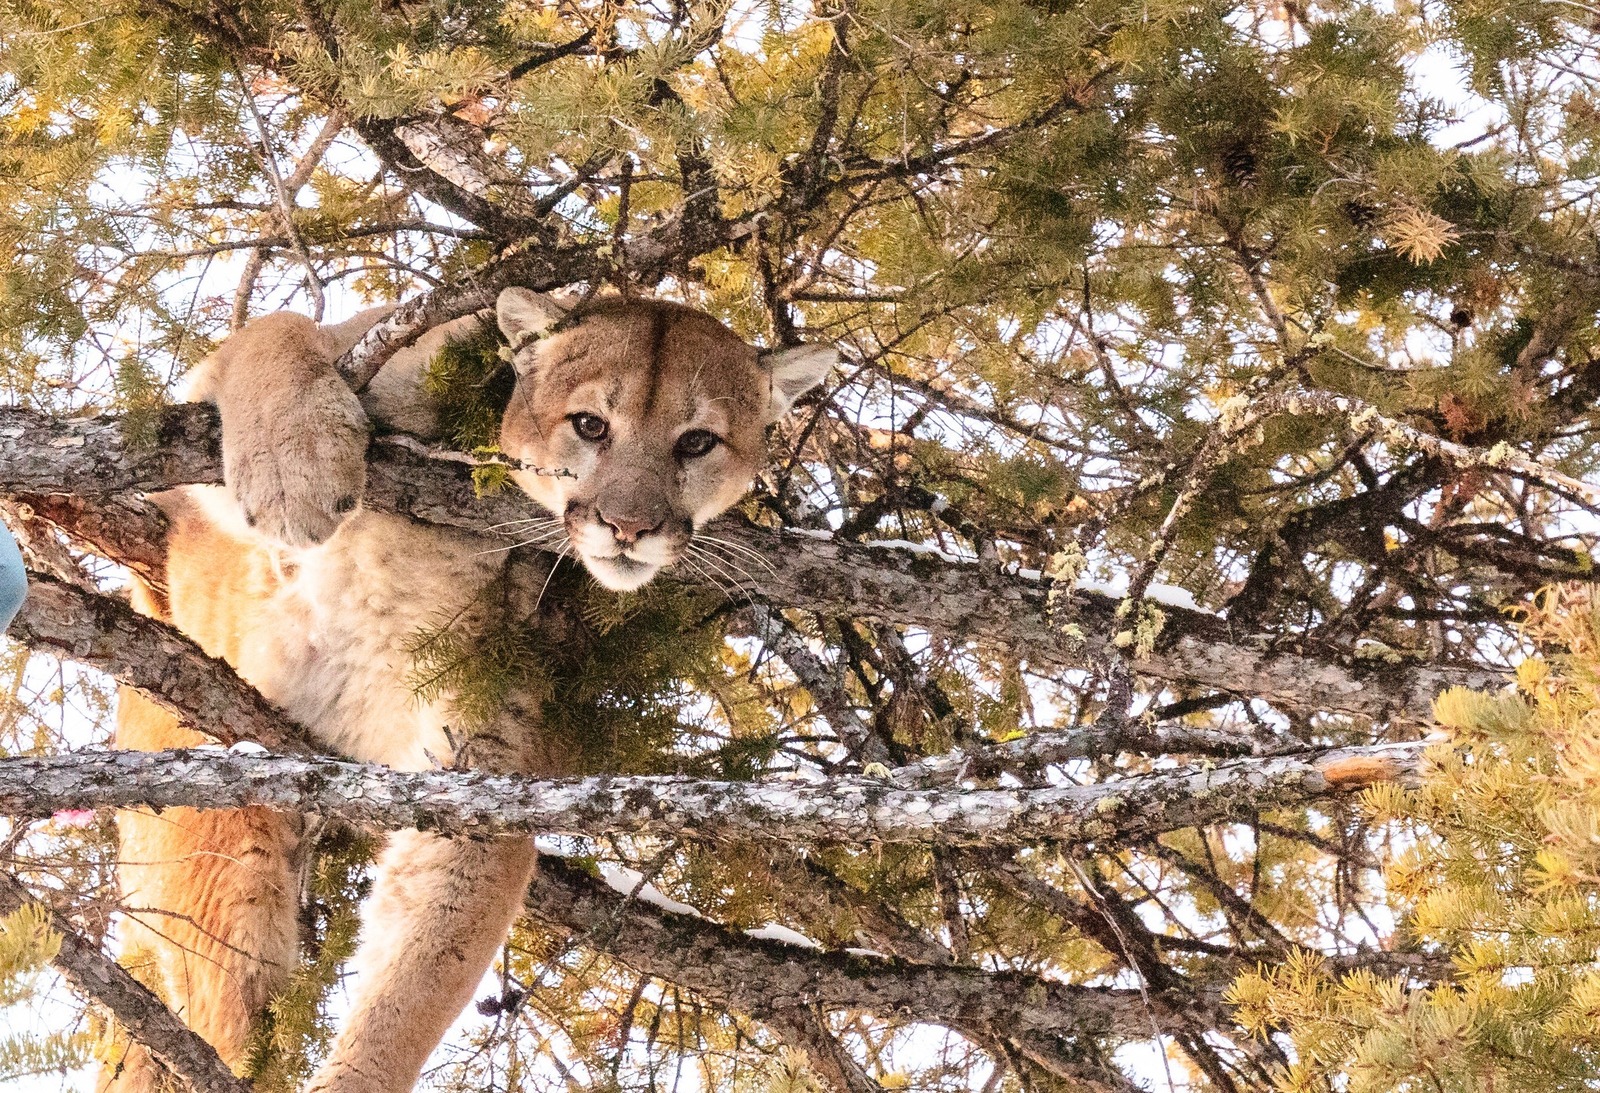 A cougar like this one, part of ongoing research in Yellowstone, was treed and killed by Montana Gov. Greg Gianforte in December 2021. After word leaked that he had taken the lion in an area not far from where he trapped and killed a wolf that wandered outside Yellowstone, he refused to confirm or deny details of his hunt. Photo by Jacob W. Frank/NPS